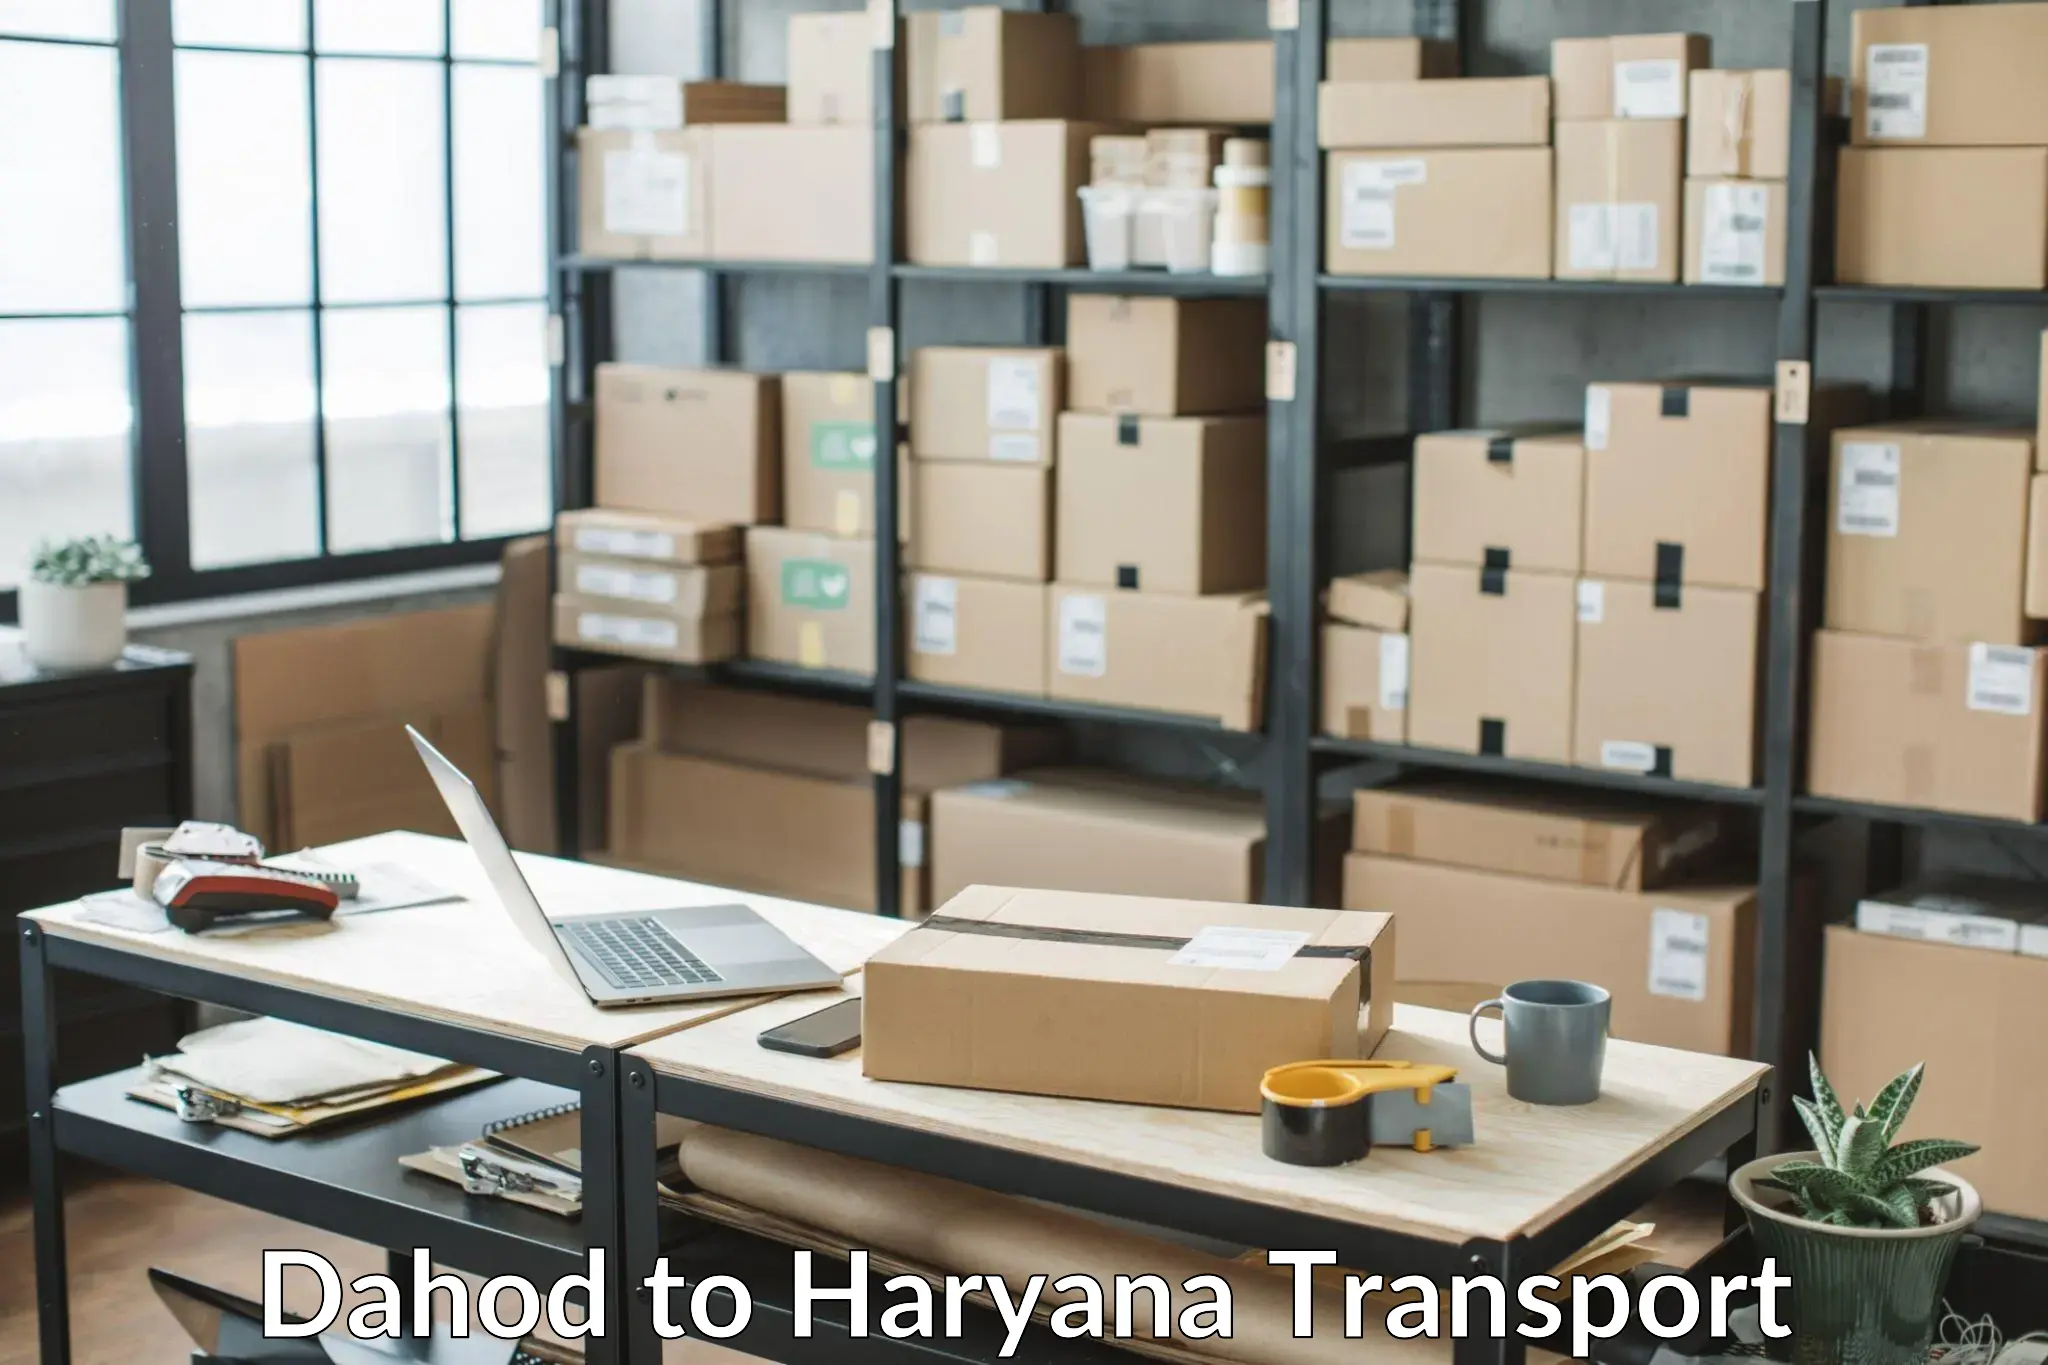 Truck transport companies in India in Dahod to Fatehabad